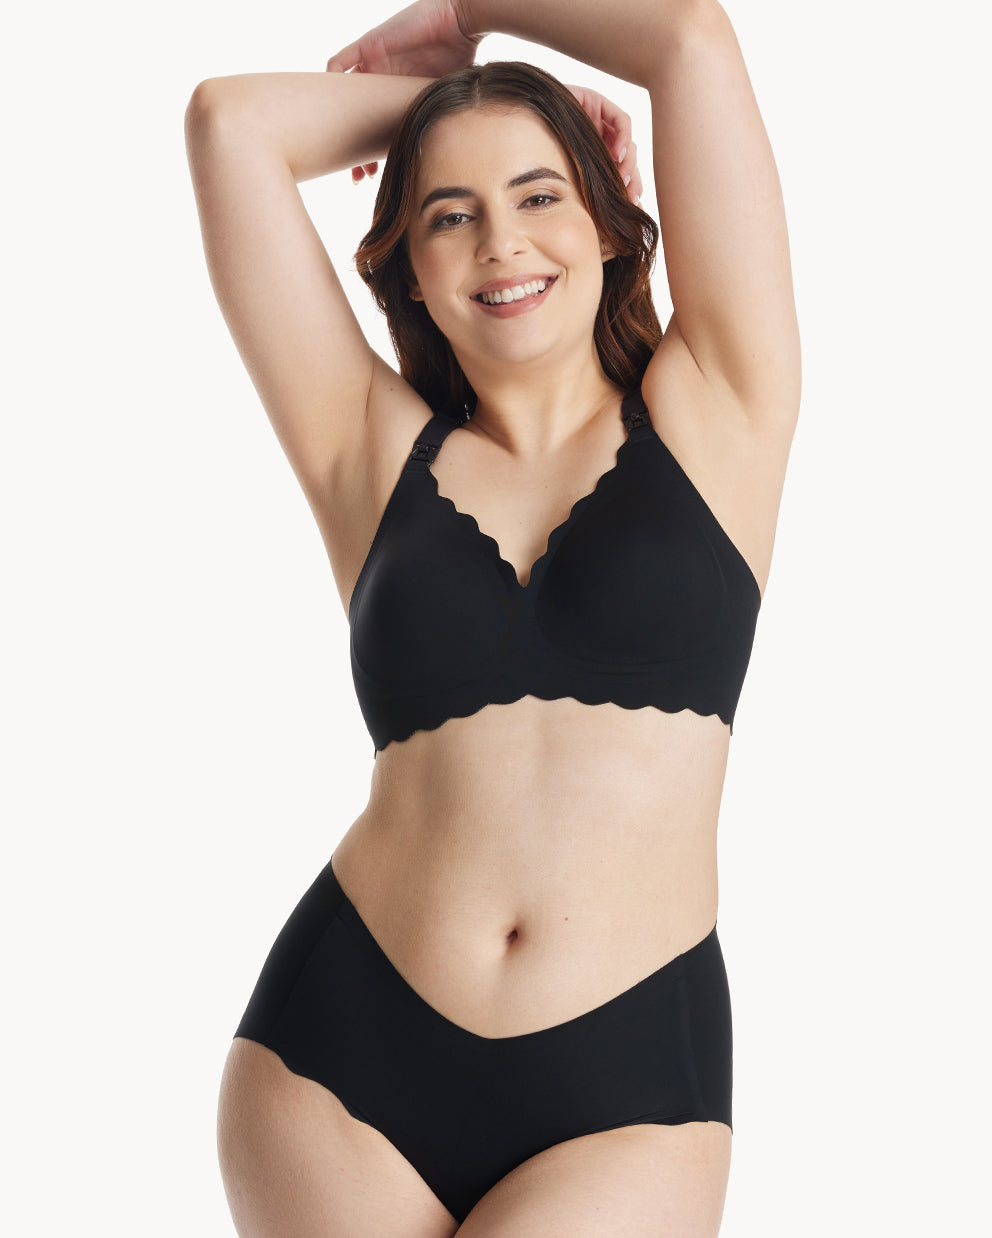 The Essentials: Our Jelly Gel + SMOOTH + Supermom Bra Bundle Supportive Pumping Bra